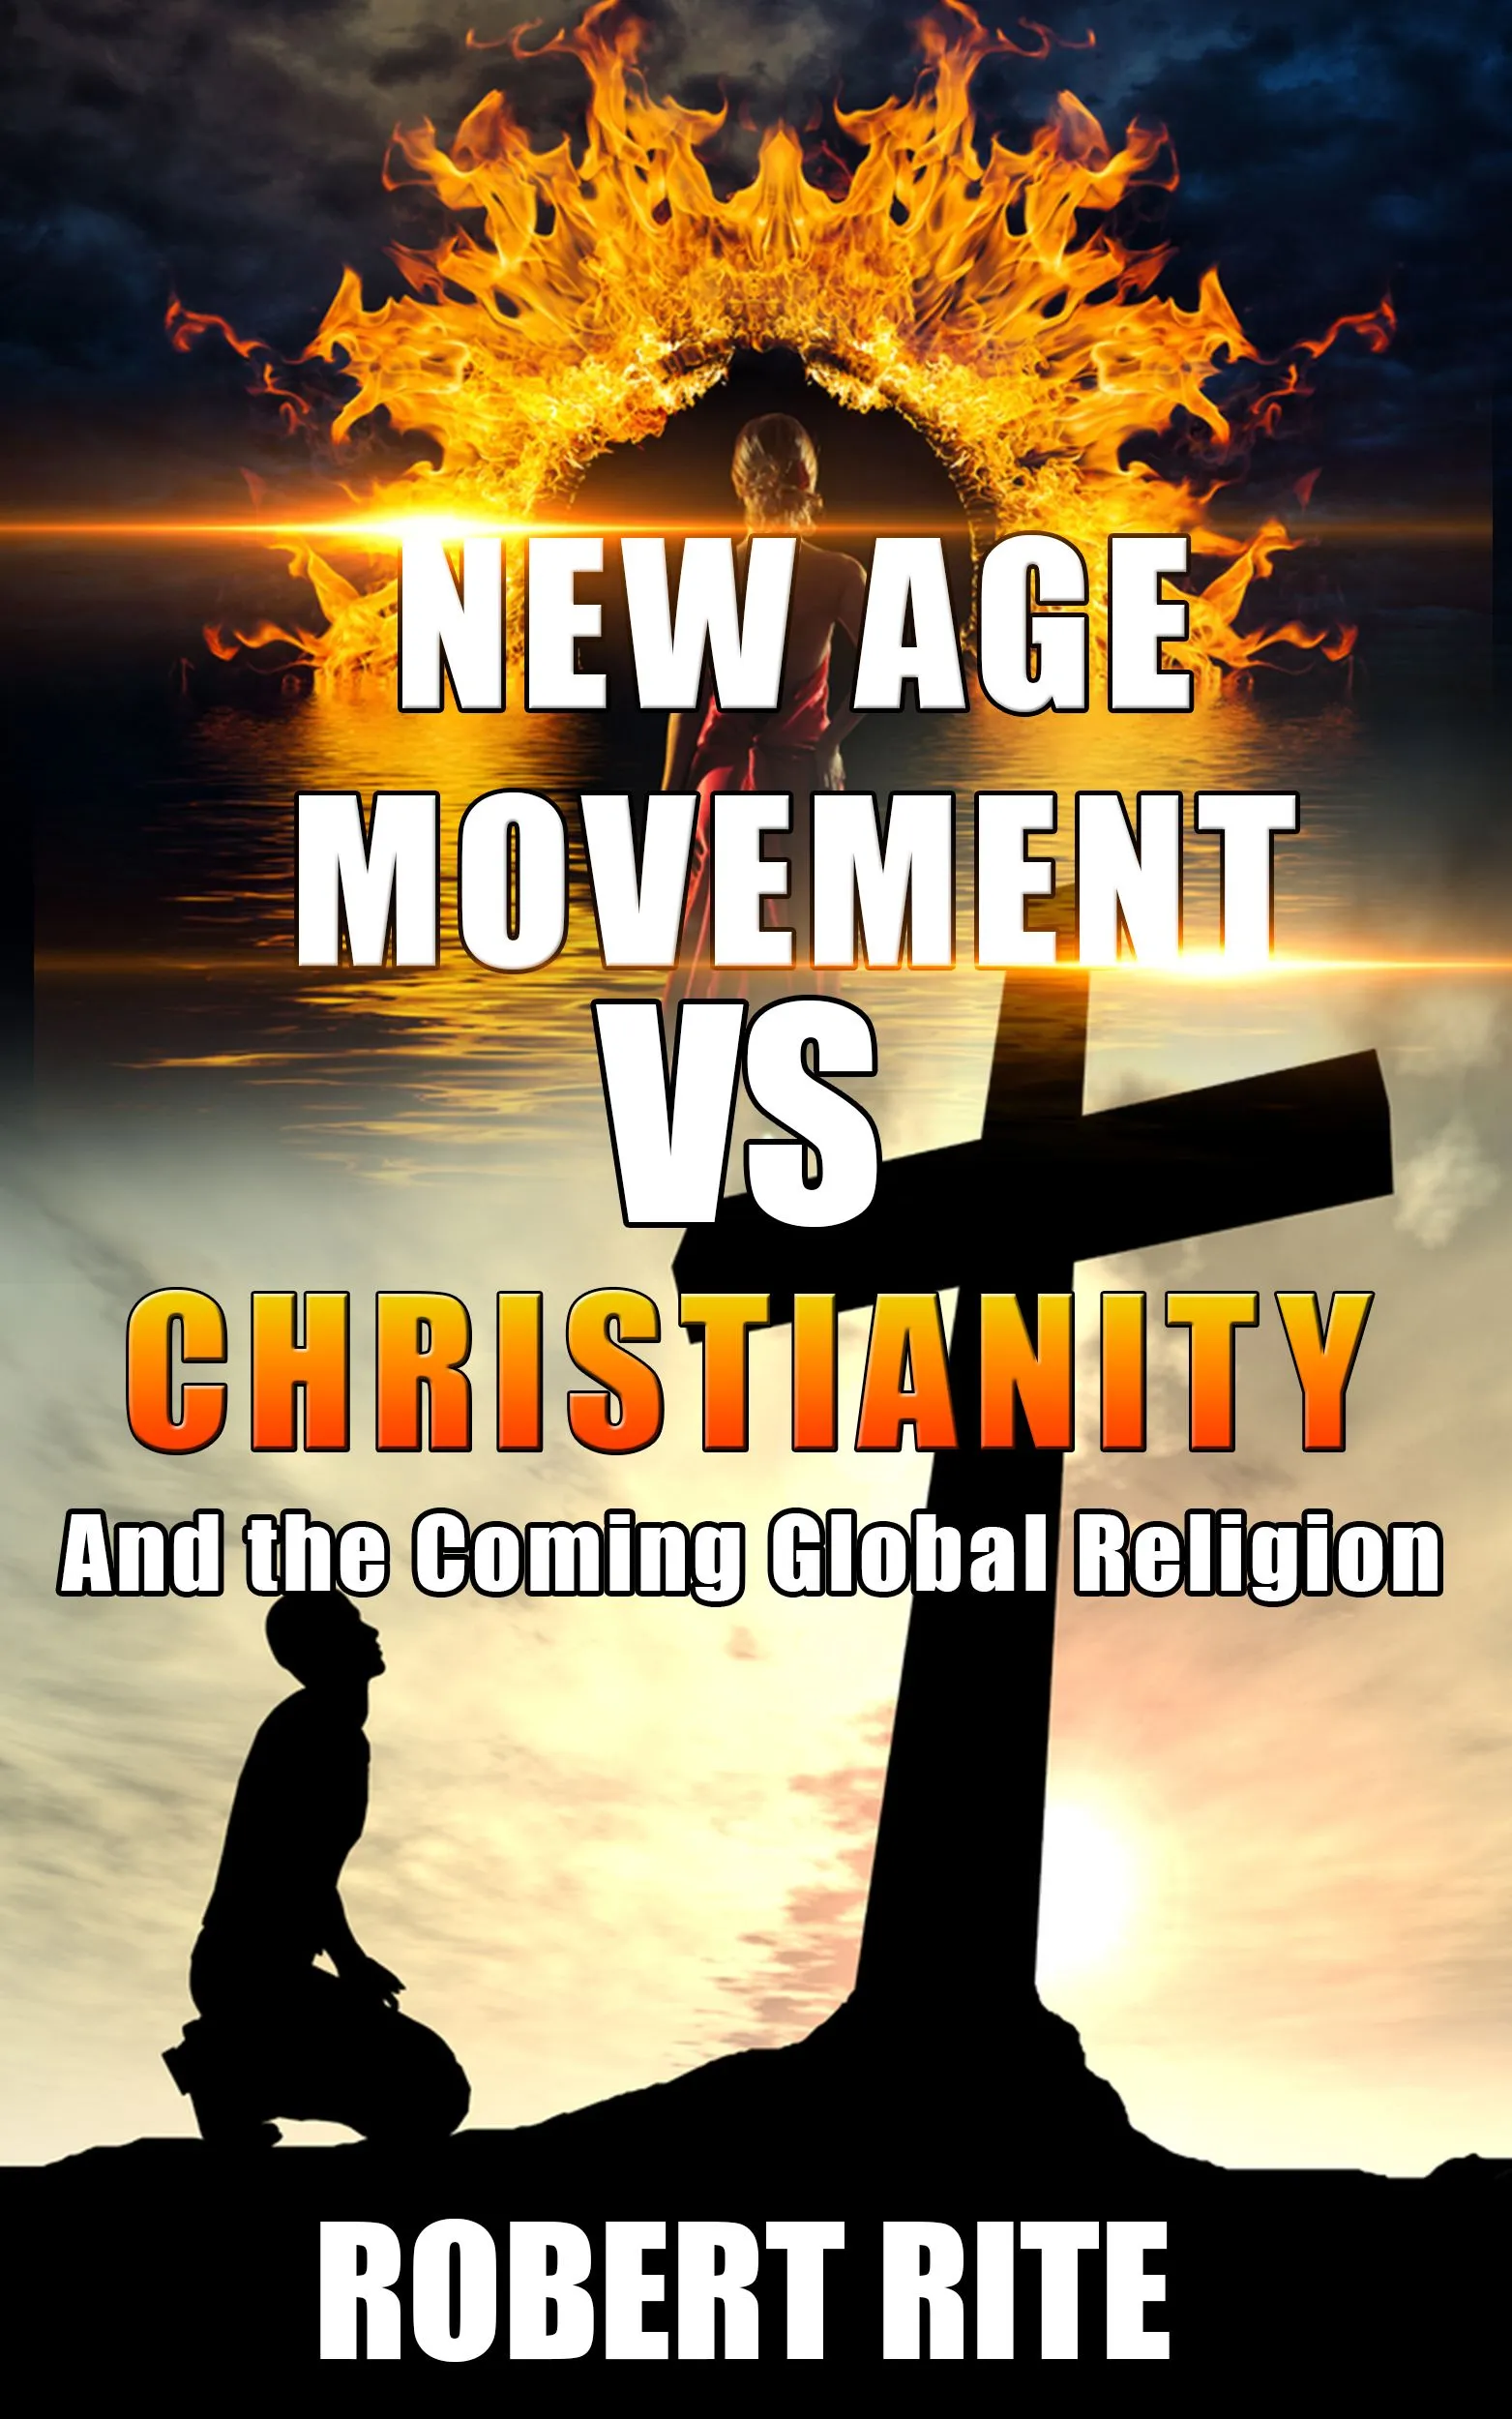 similarities between christianity and new age movement